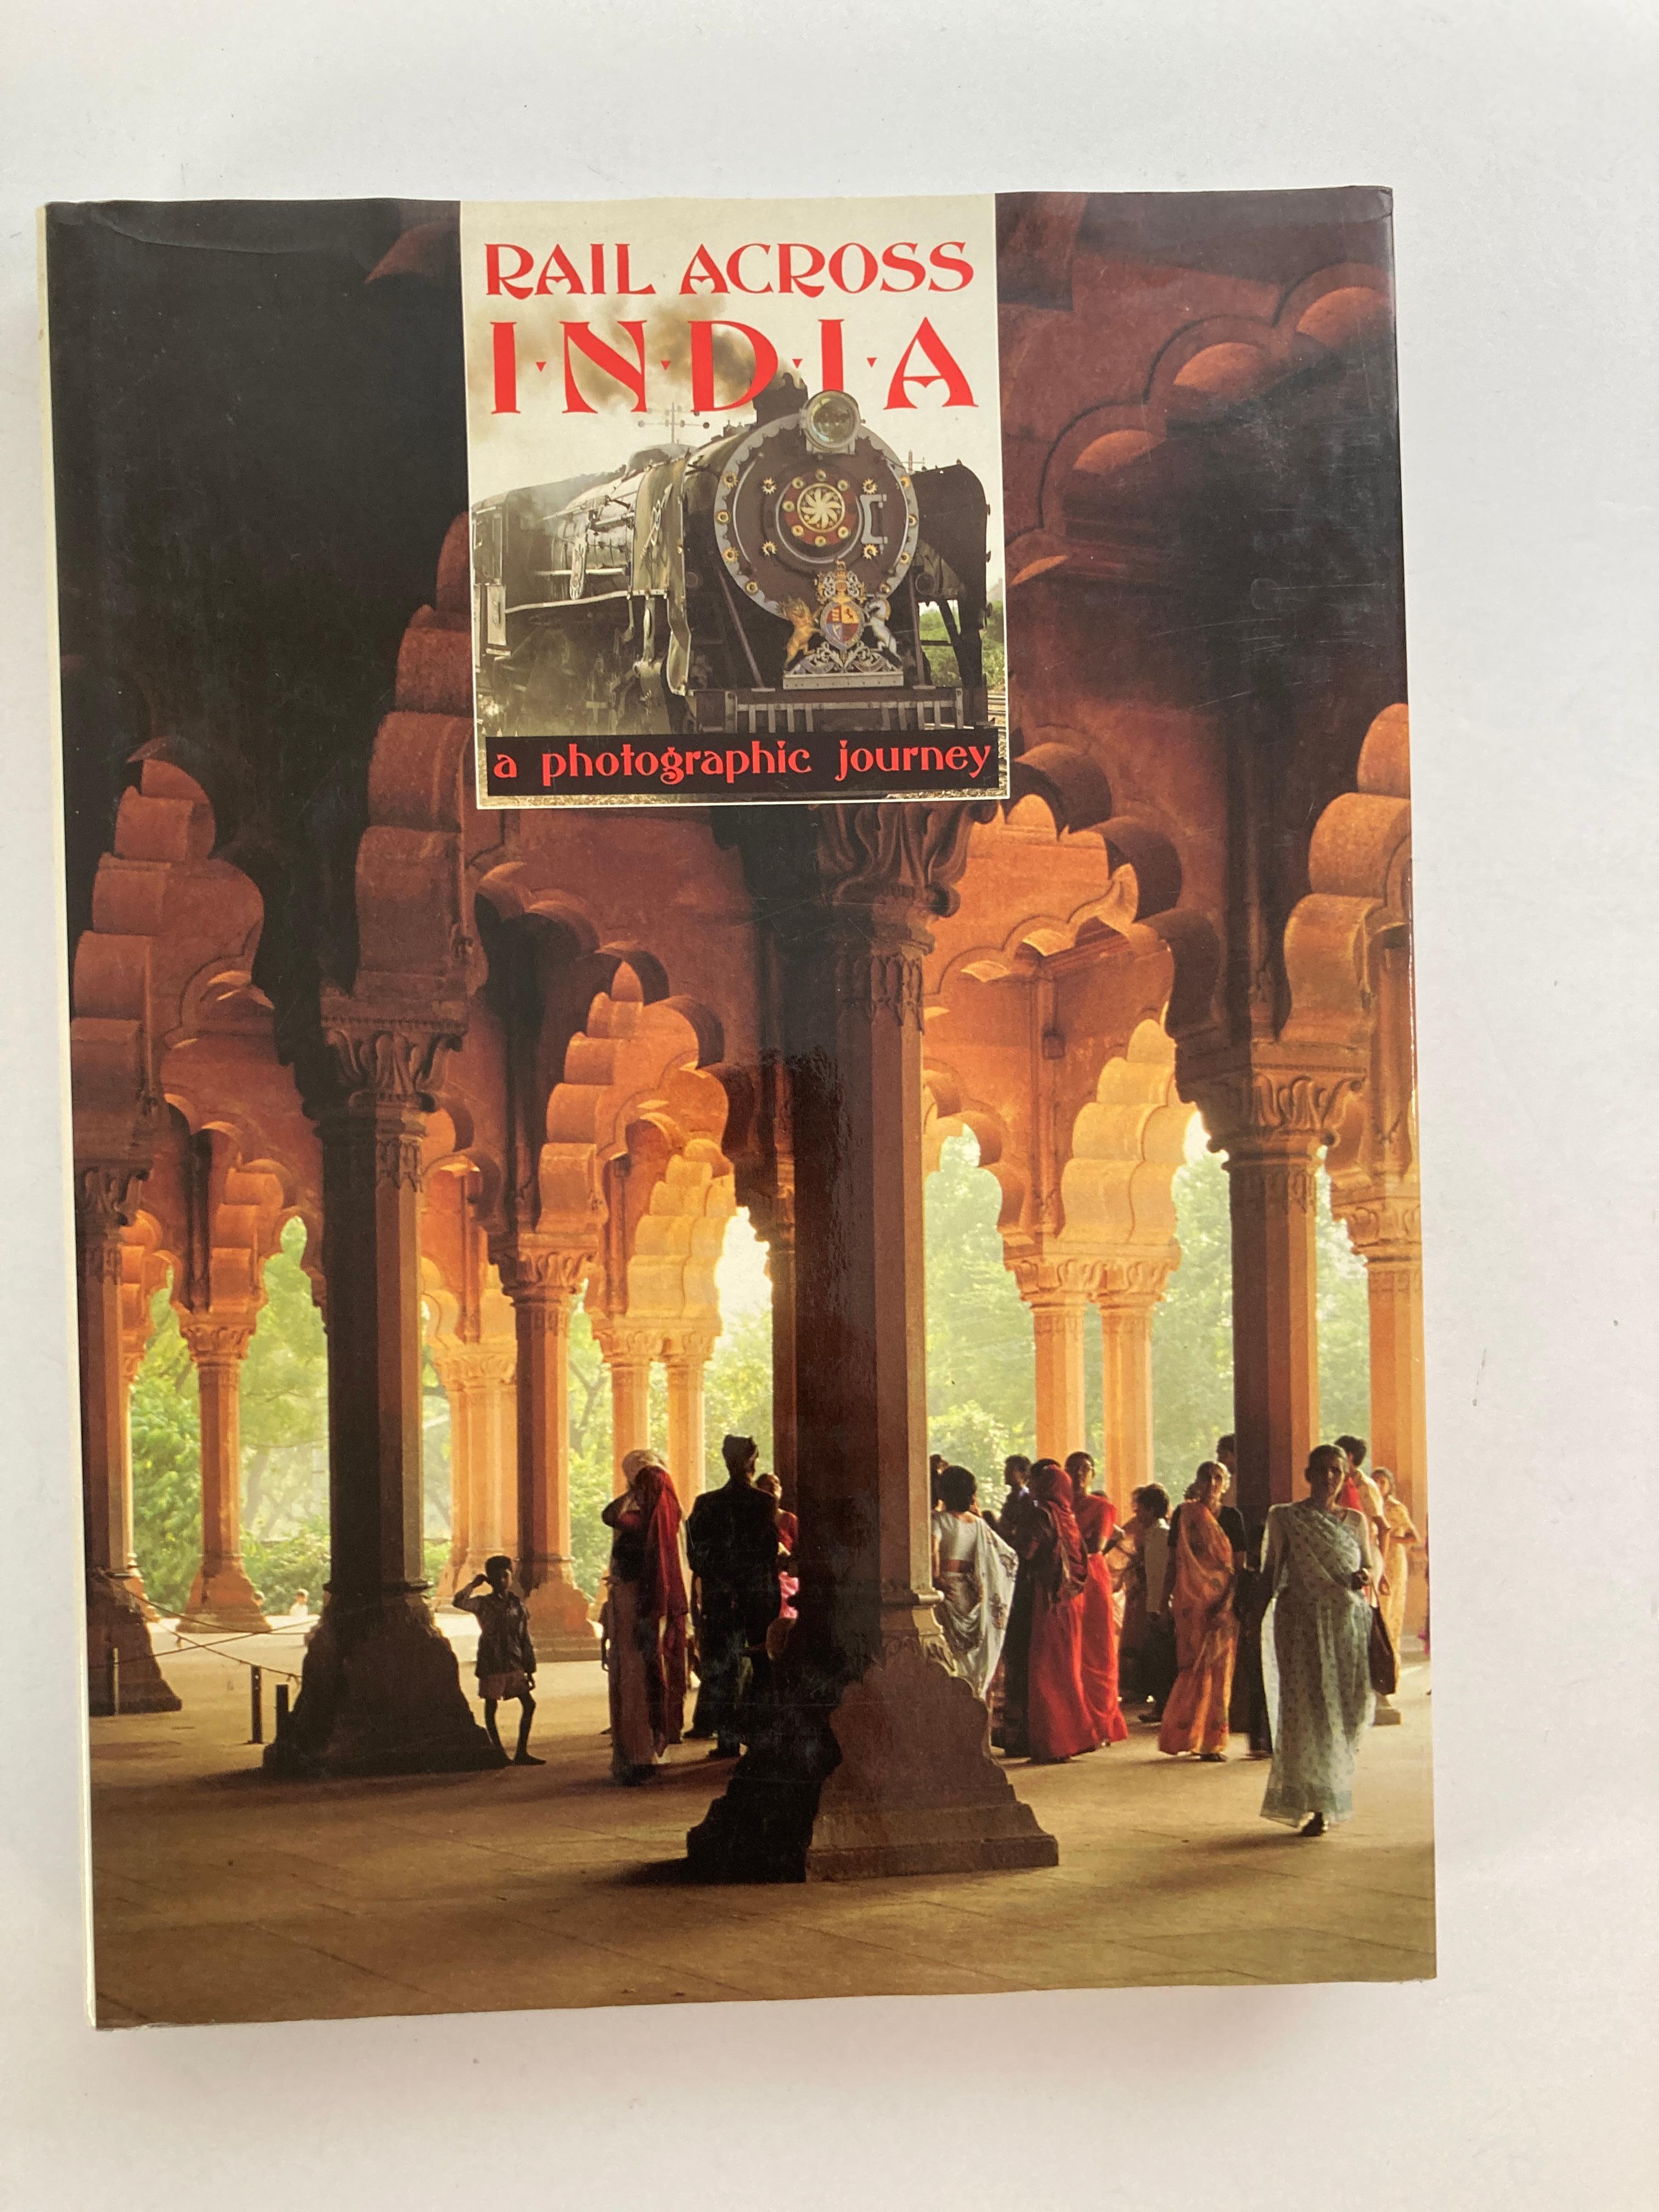 Rail Across India: A Photographic Journey
PET, Paul C.; Moorhouse, Geoffrey; Hollingsworth, Brian.
Photographs of the scenery, trains, and social life of India are accompanied by a description of a train ride and a discussion of the country's